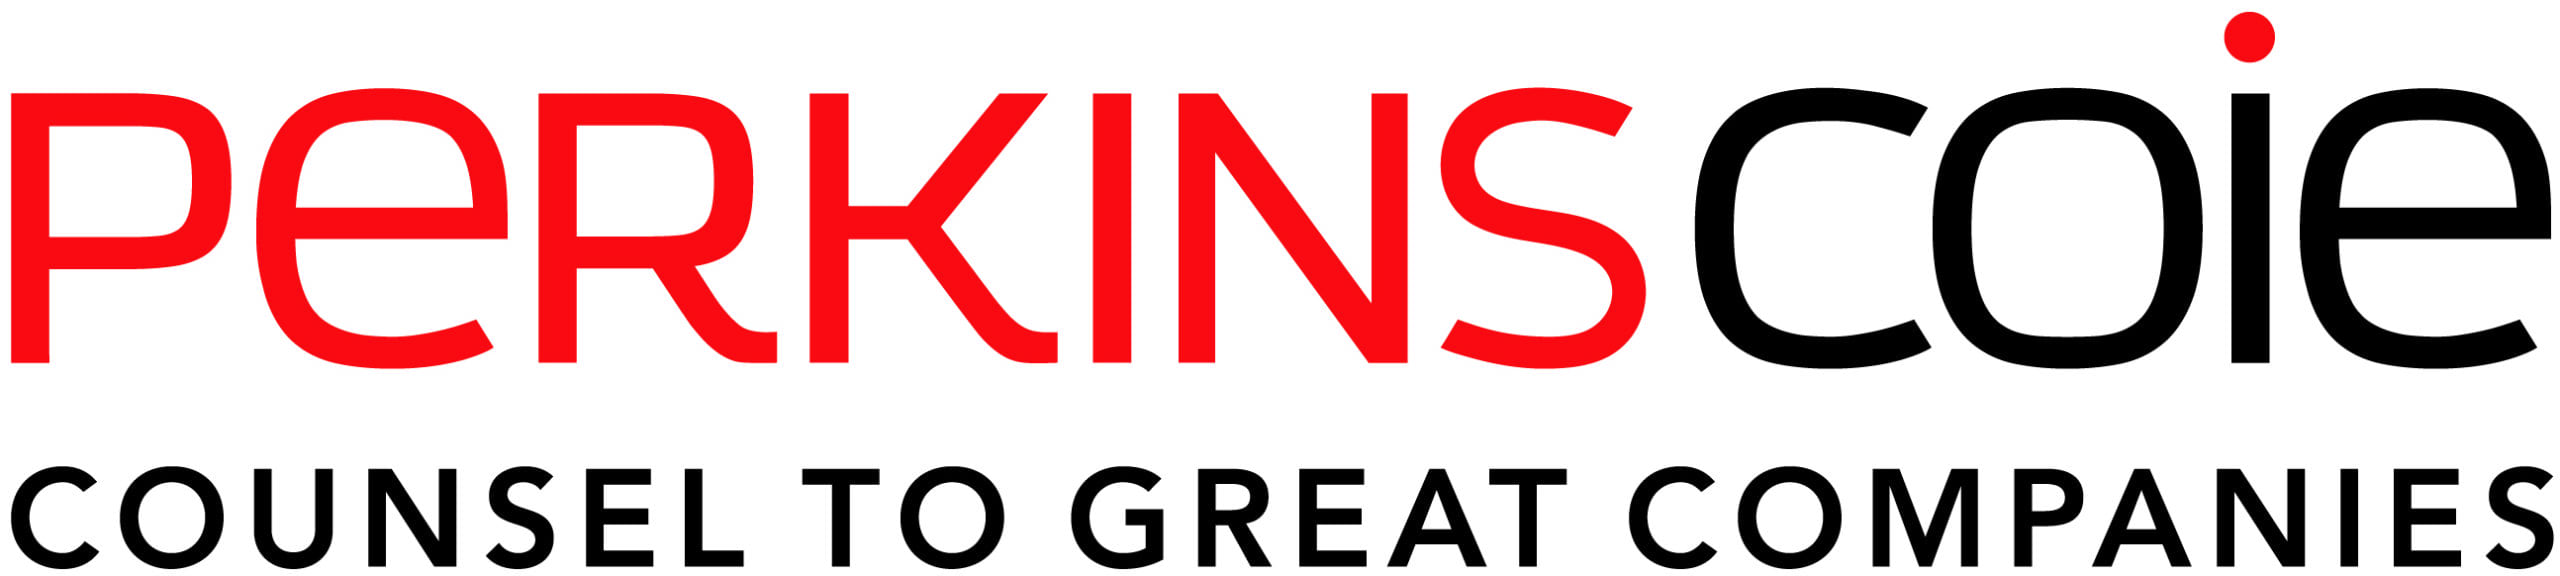 Perkins Coie - Counsel to great companies